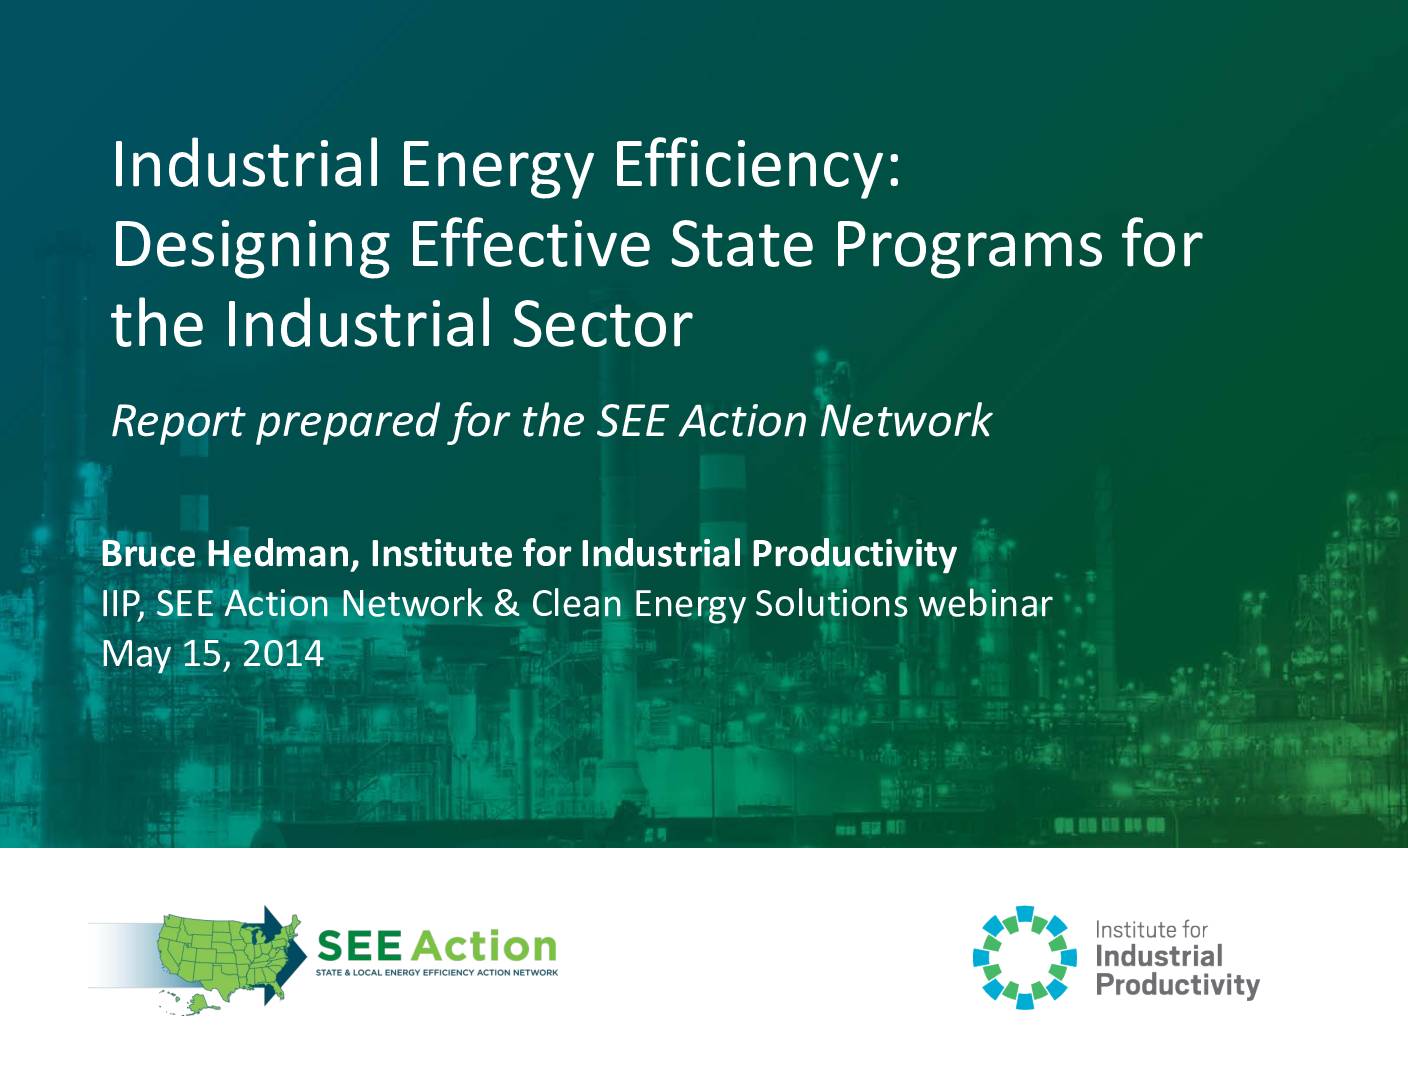 Industrial Energy Efficiency: Designing Effective State Programs for the Industrial Sector